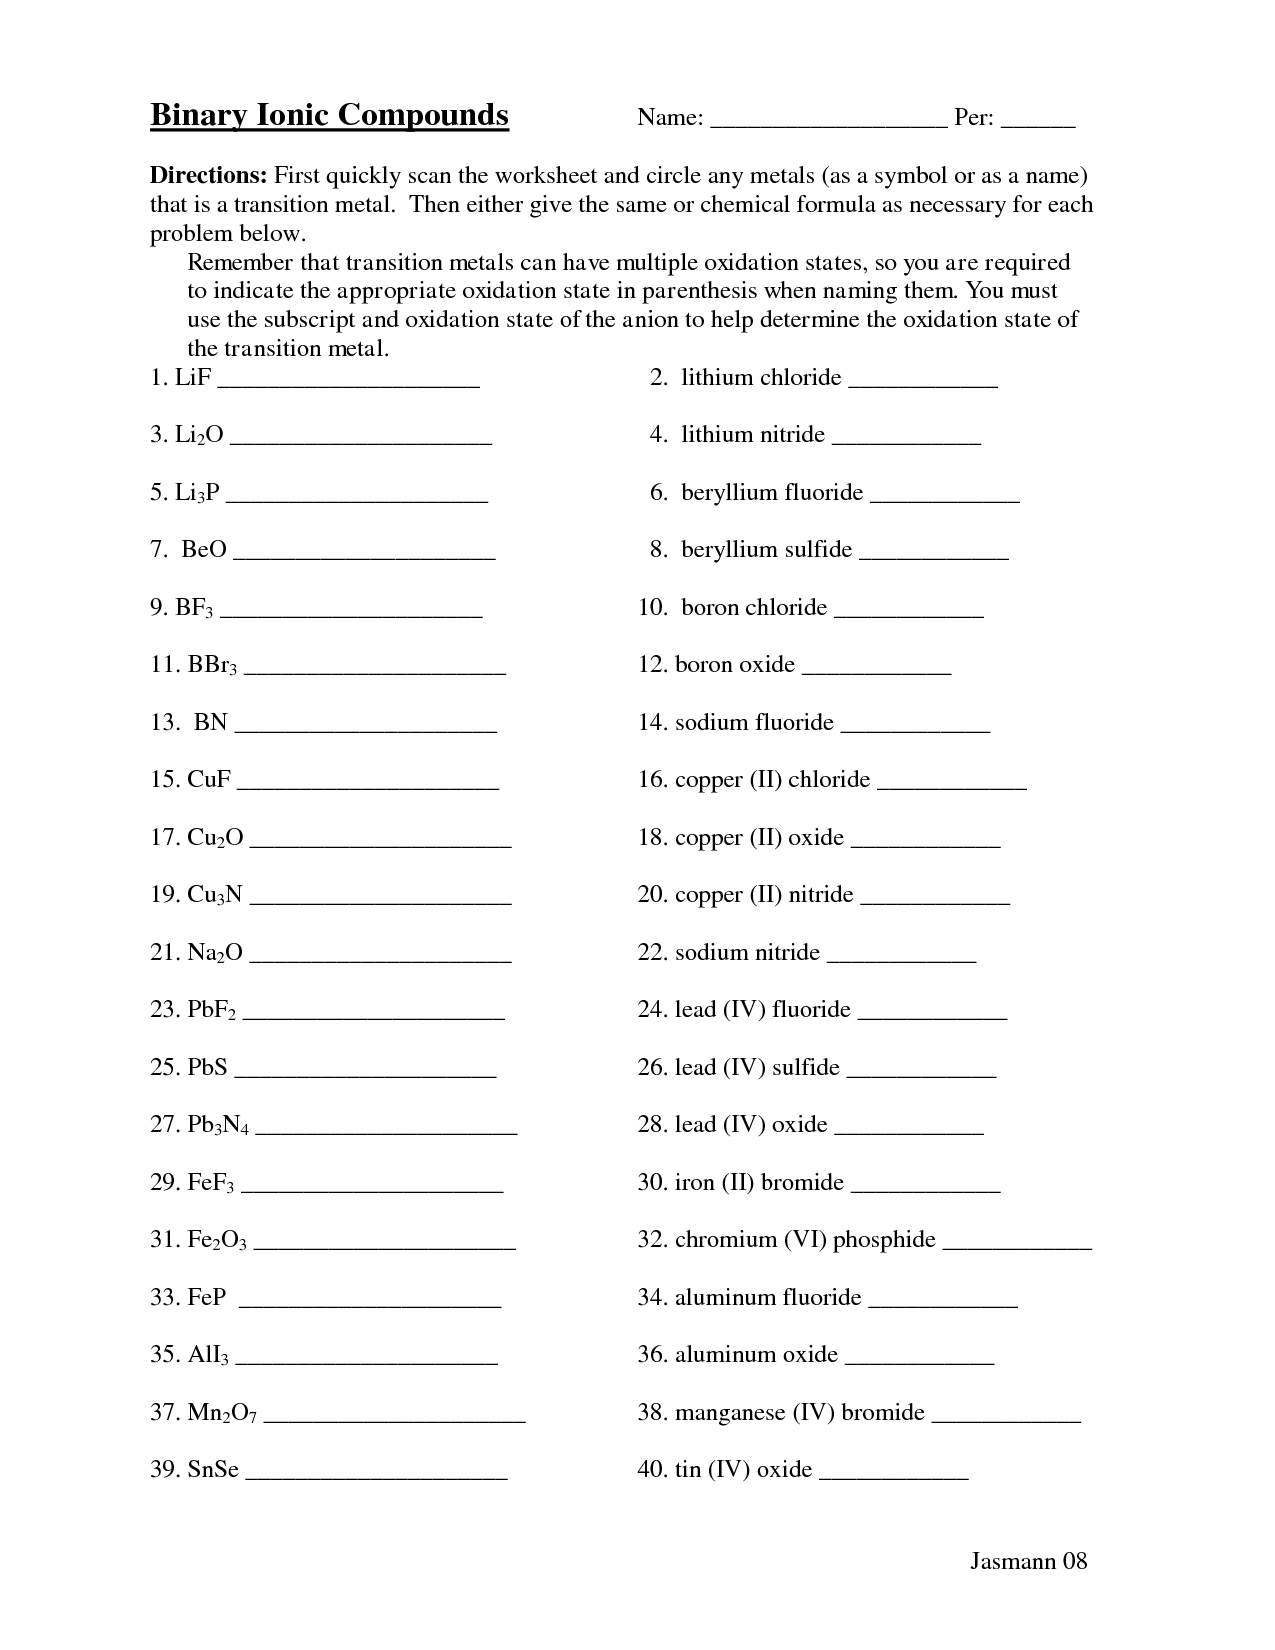 Worksheet  Simple Binary Ionic Compounds Worksheet 2 Answers